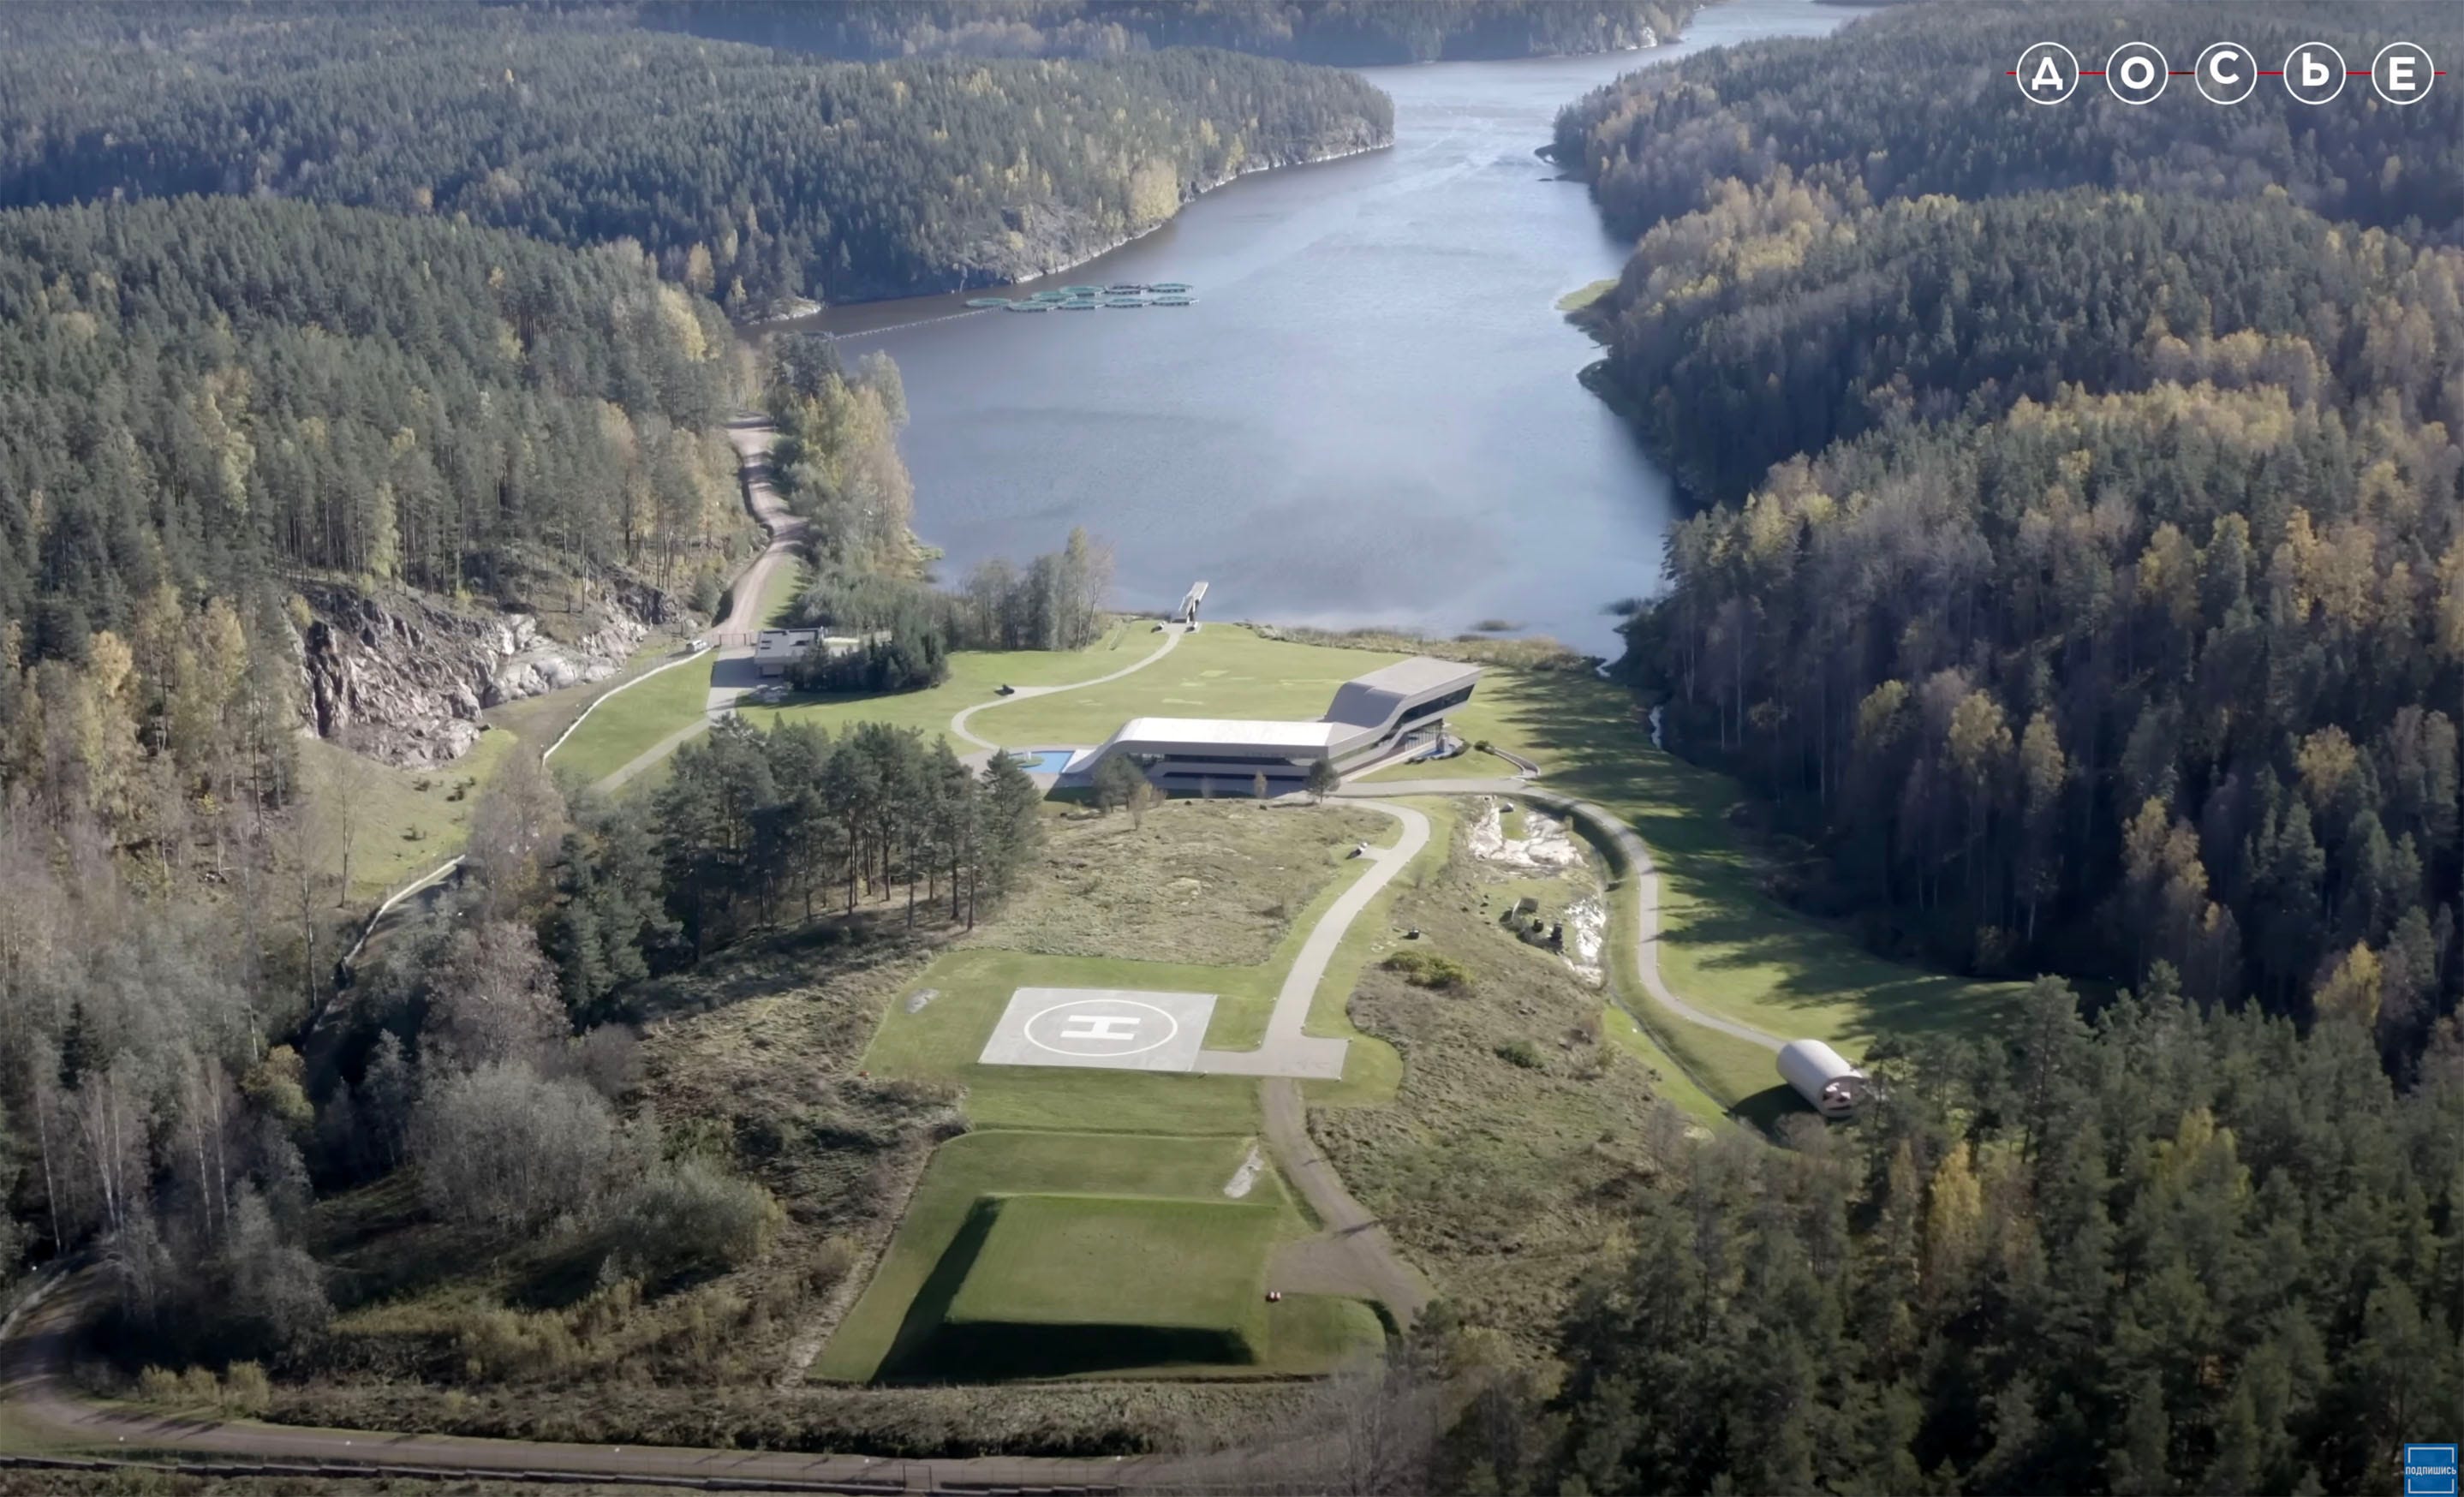 Putin's secret country compound revealed just 18 miles away from NATO ...